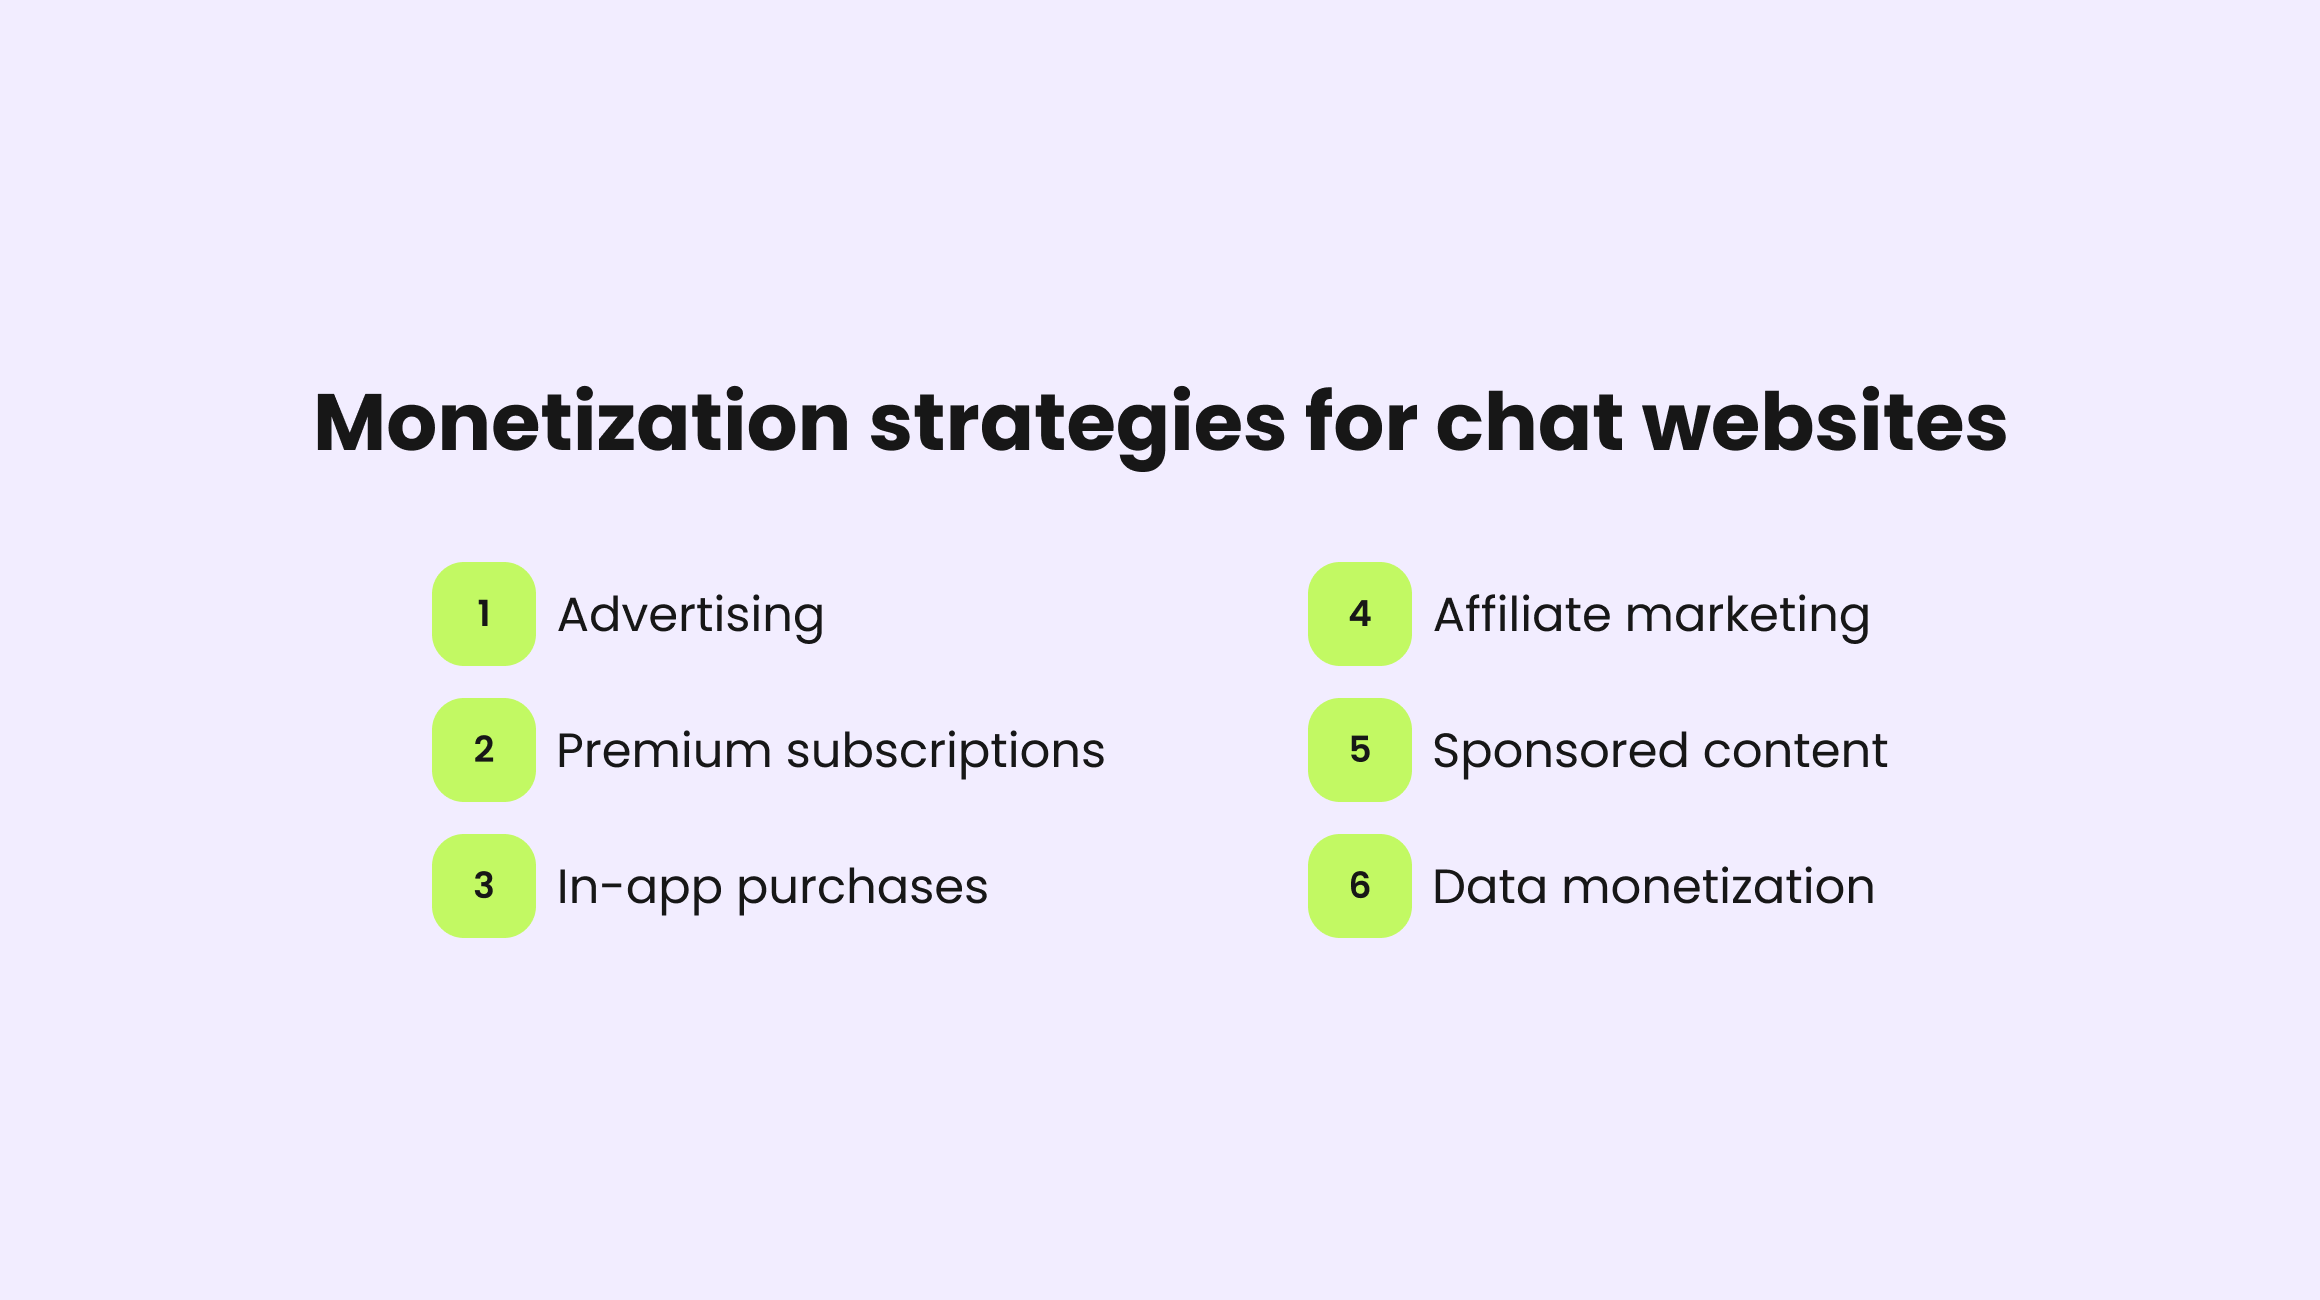 Monetization strategies for chat websites